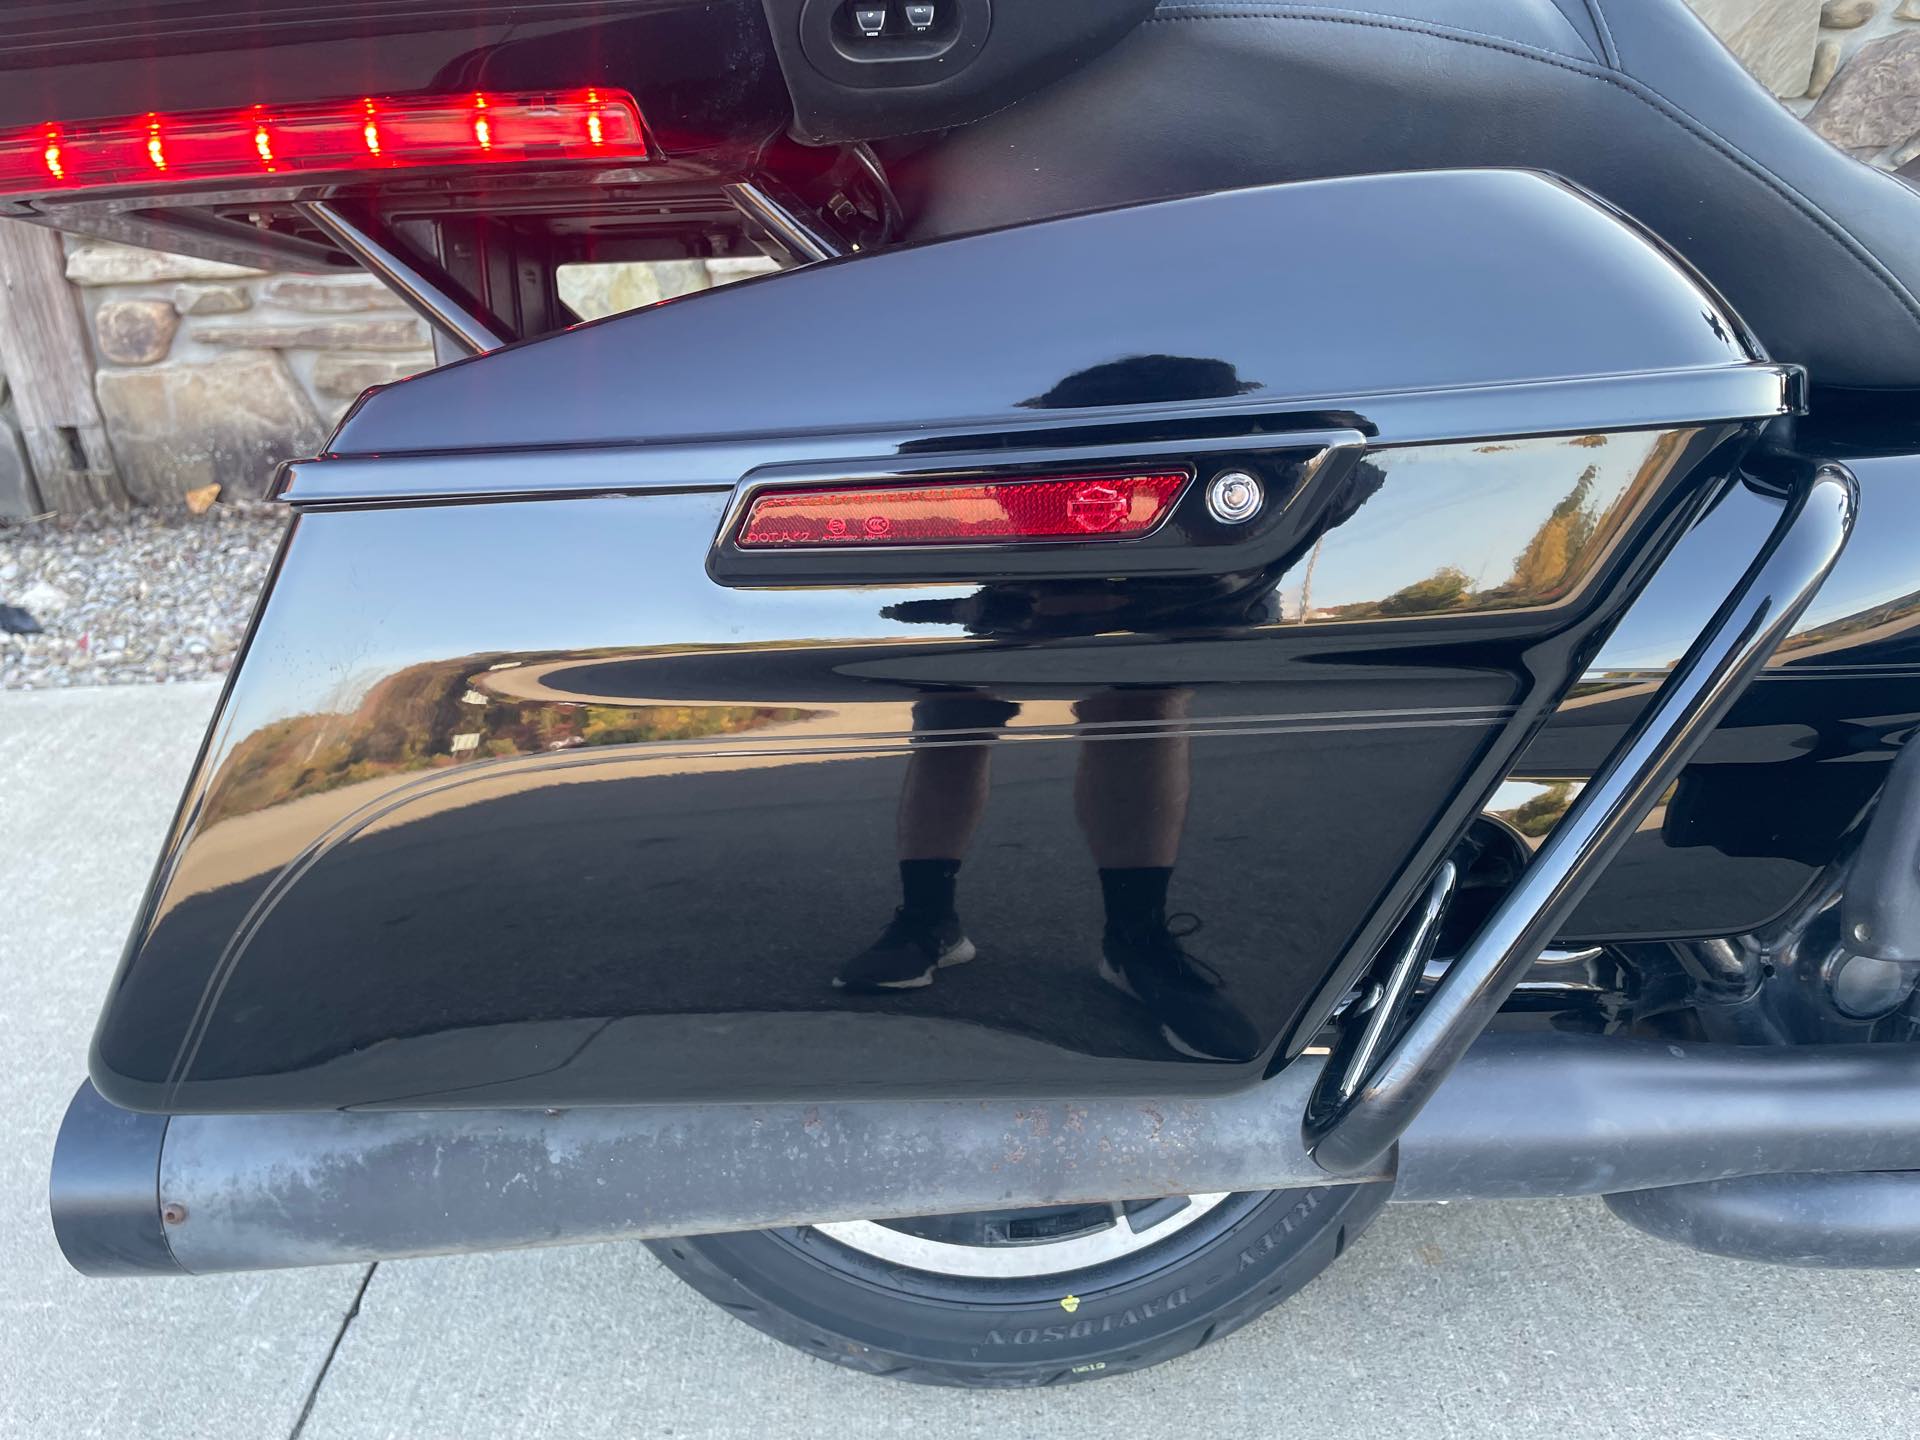 2019 Harley-Davidson Road Glide Ultra at Arkport Cycles